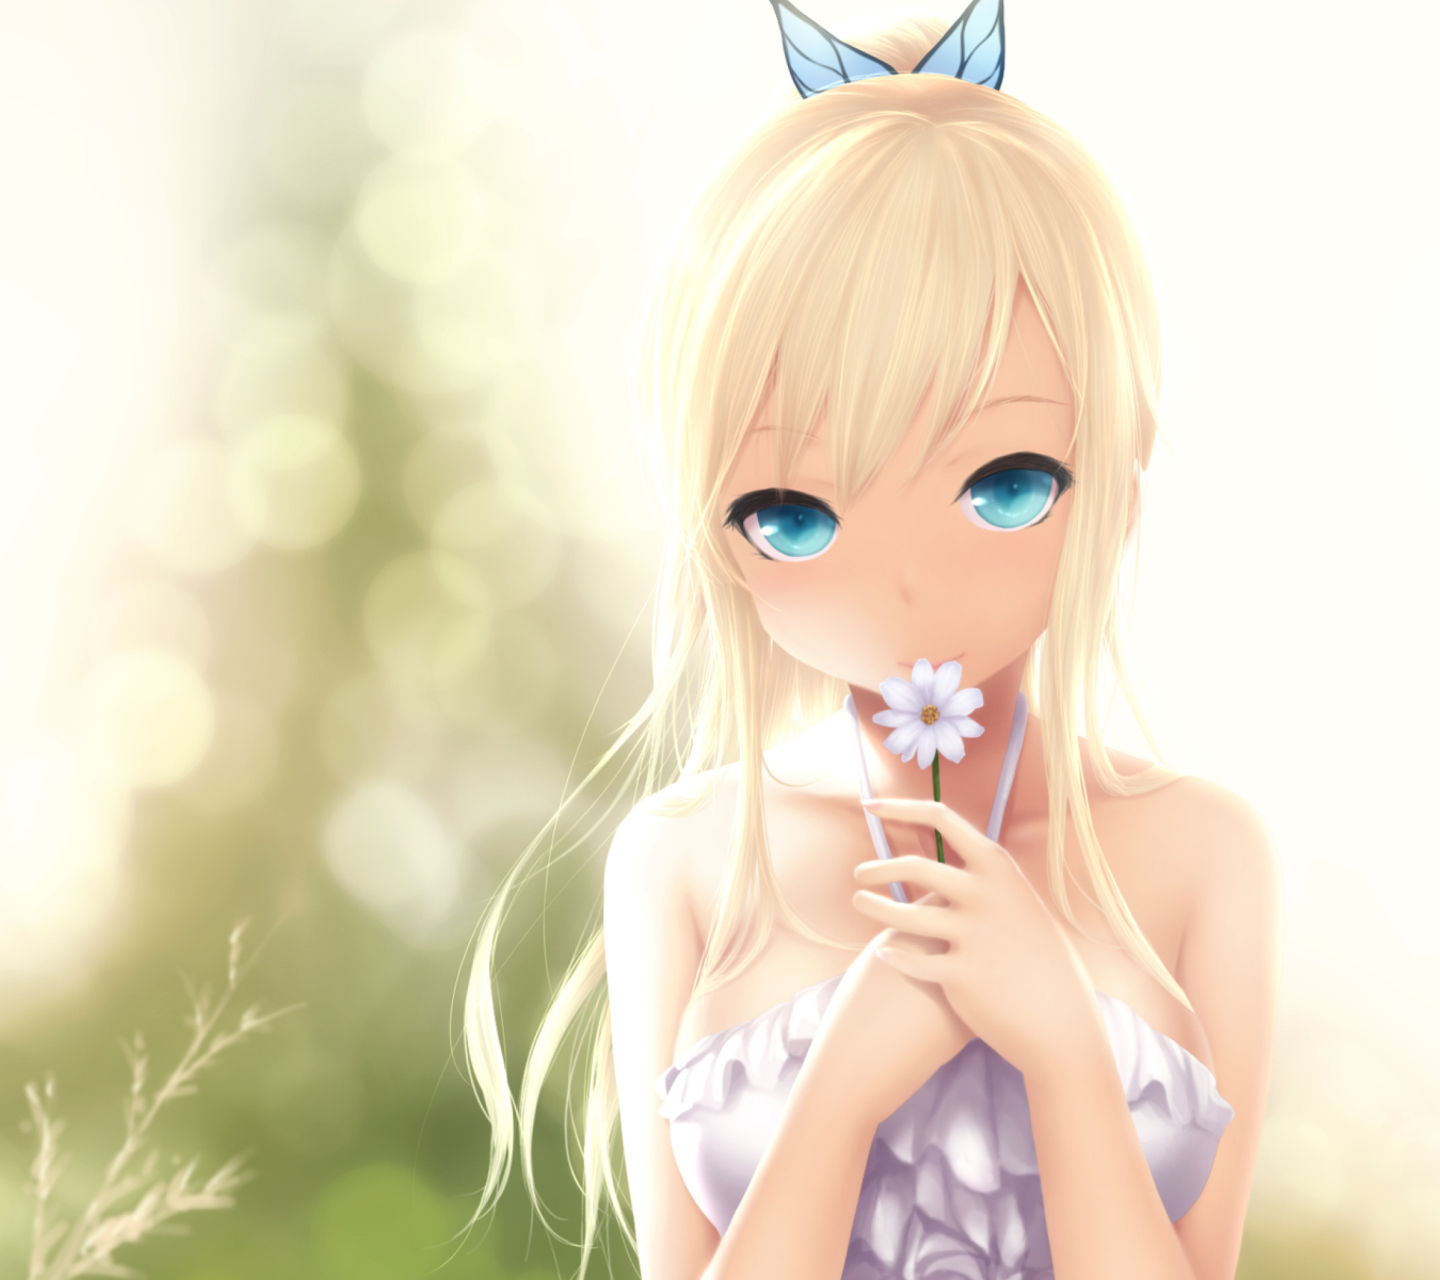 Anime Blonde With Daisy wallpaper 1440x1280